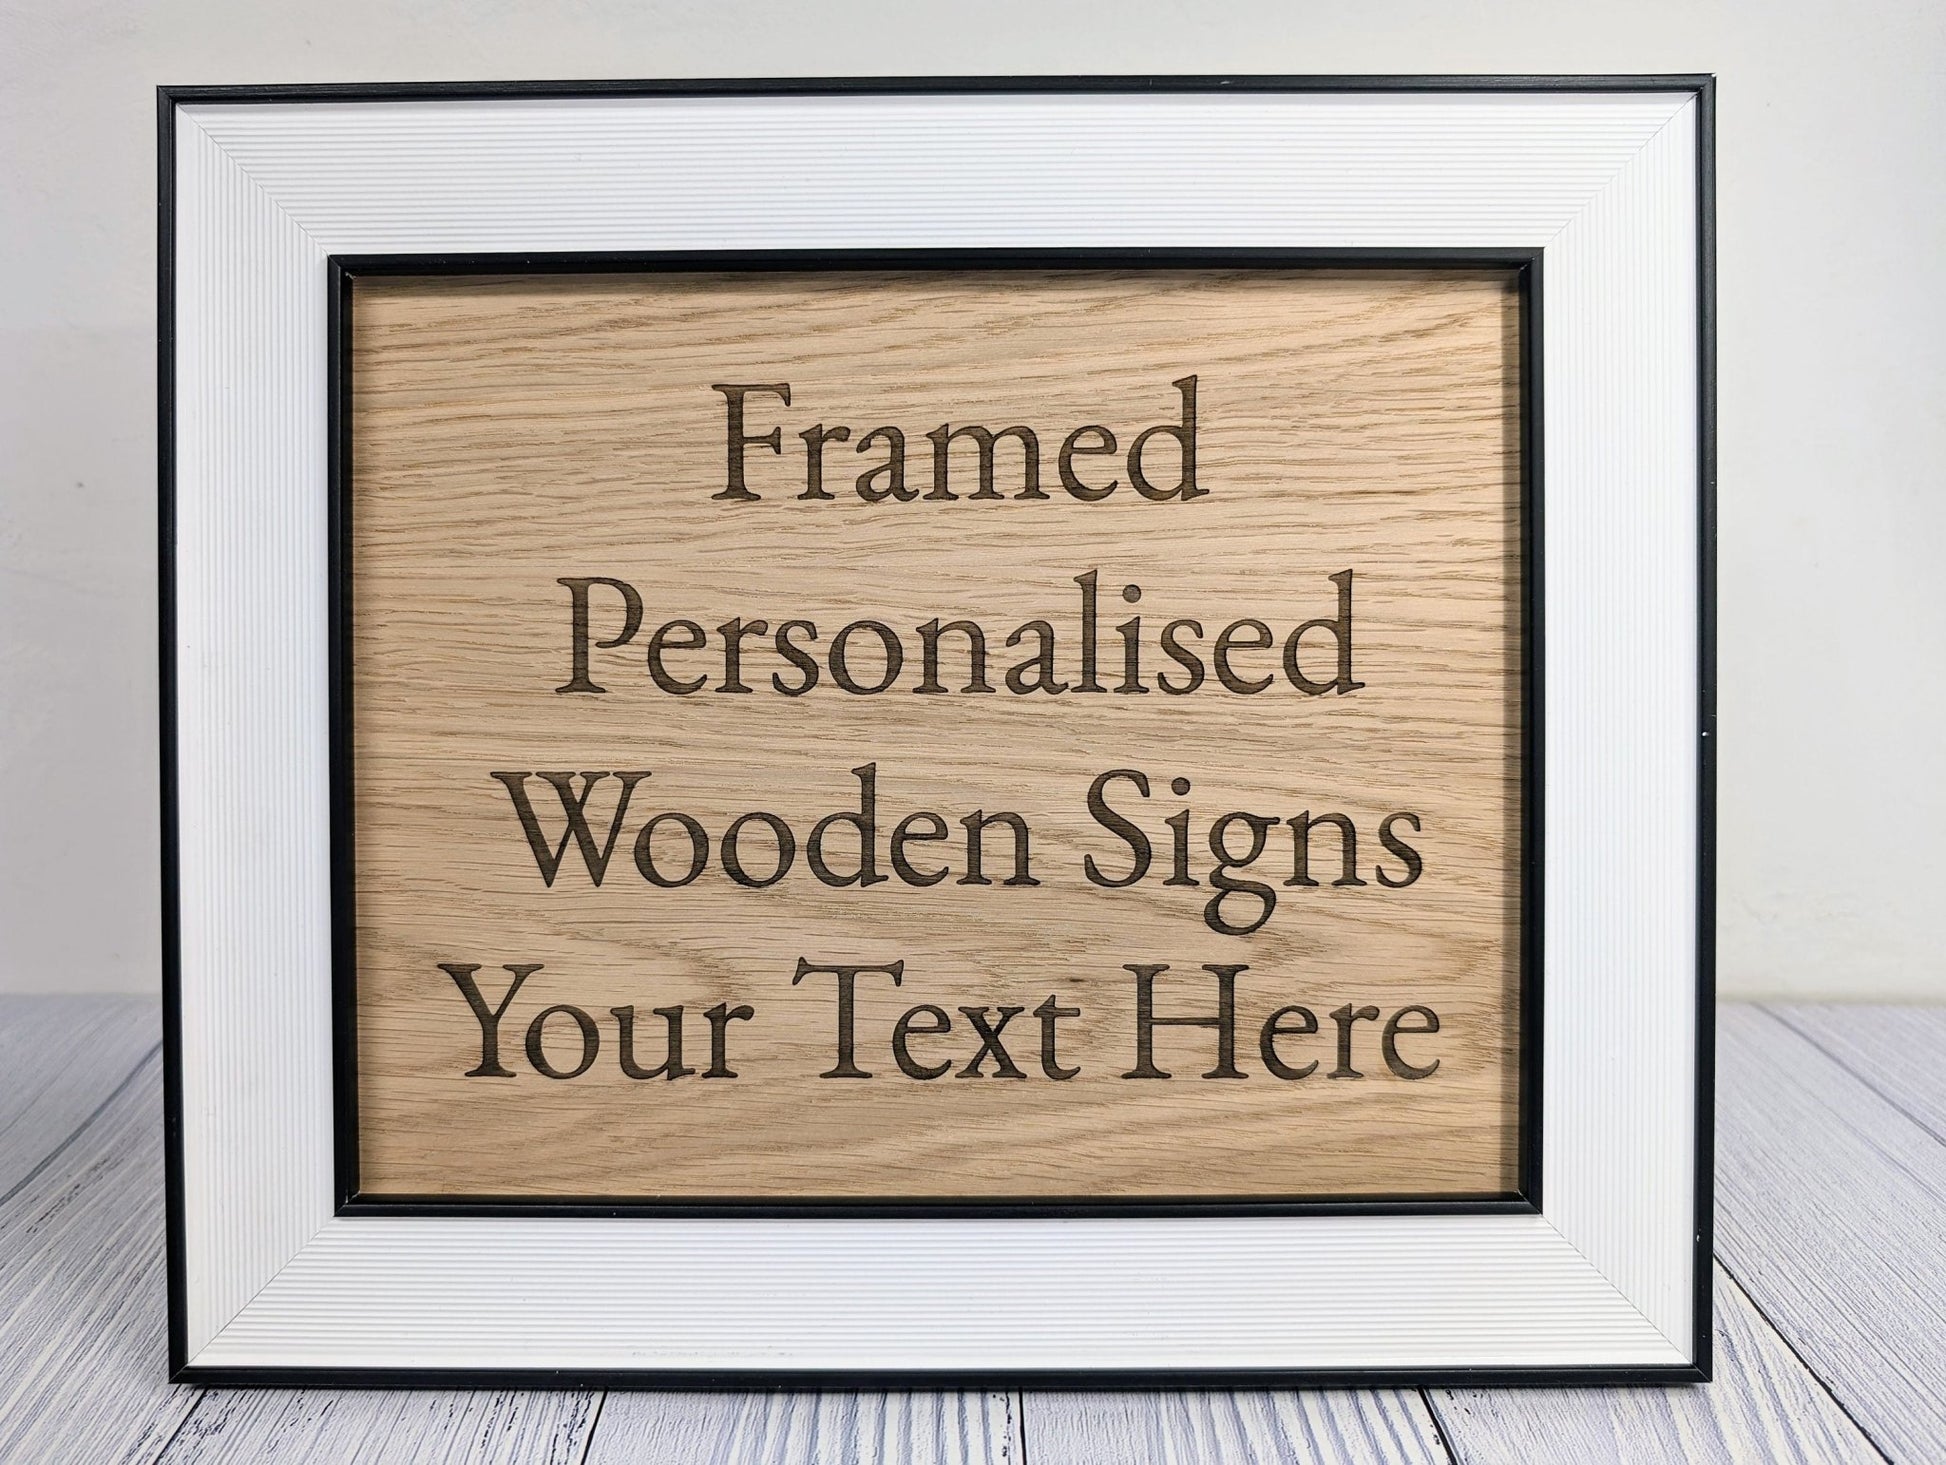 Customisable Wooden Sign in Monochrome Frame - Personalised Oak Plaque | 253x202mm, Versatile Wall/Table Decor, Handcrafted - CherryGroveCraft